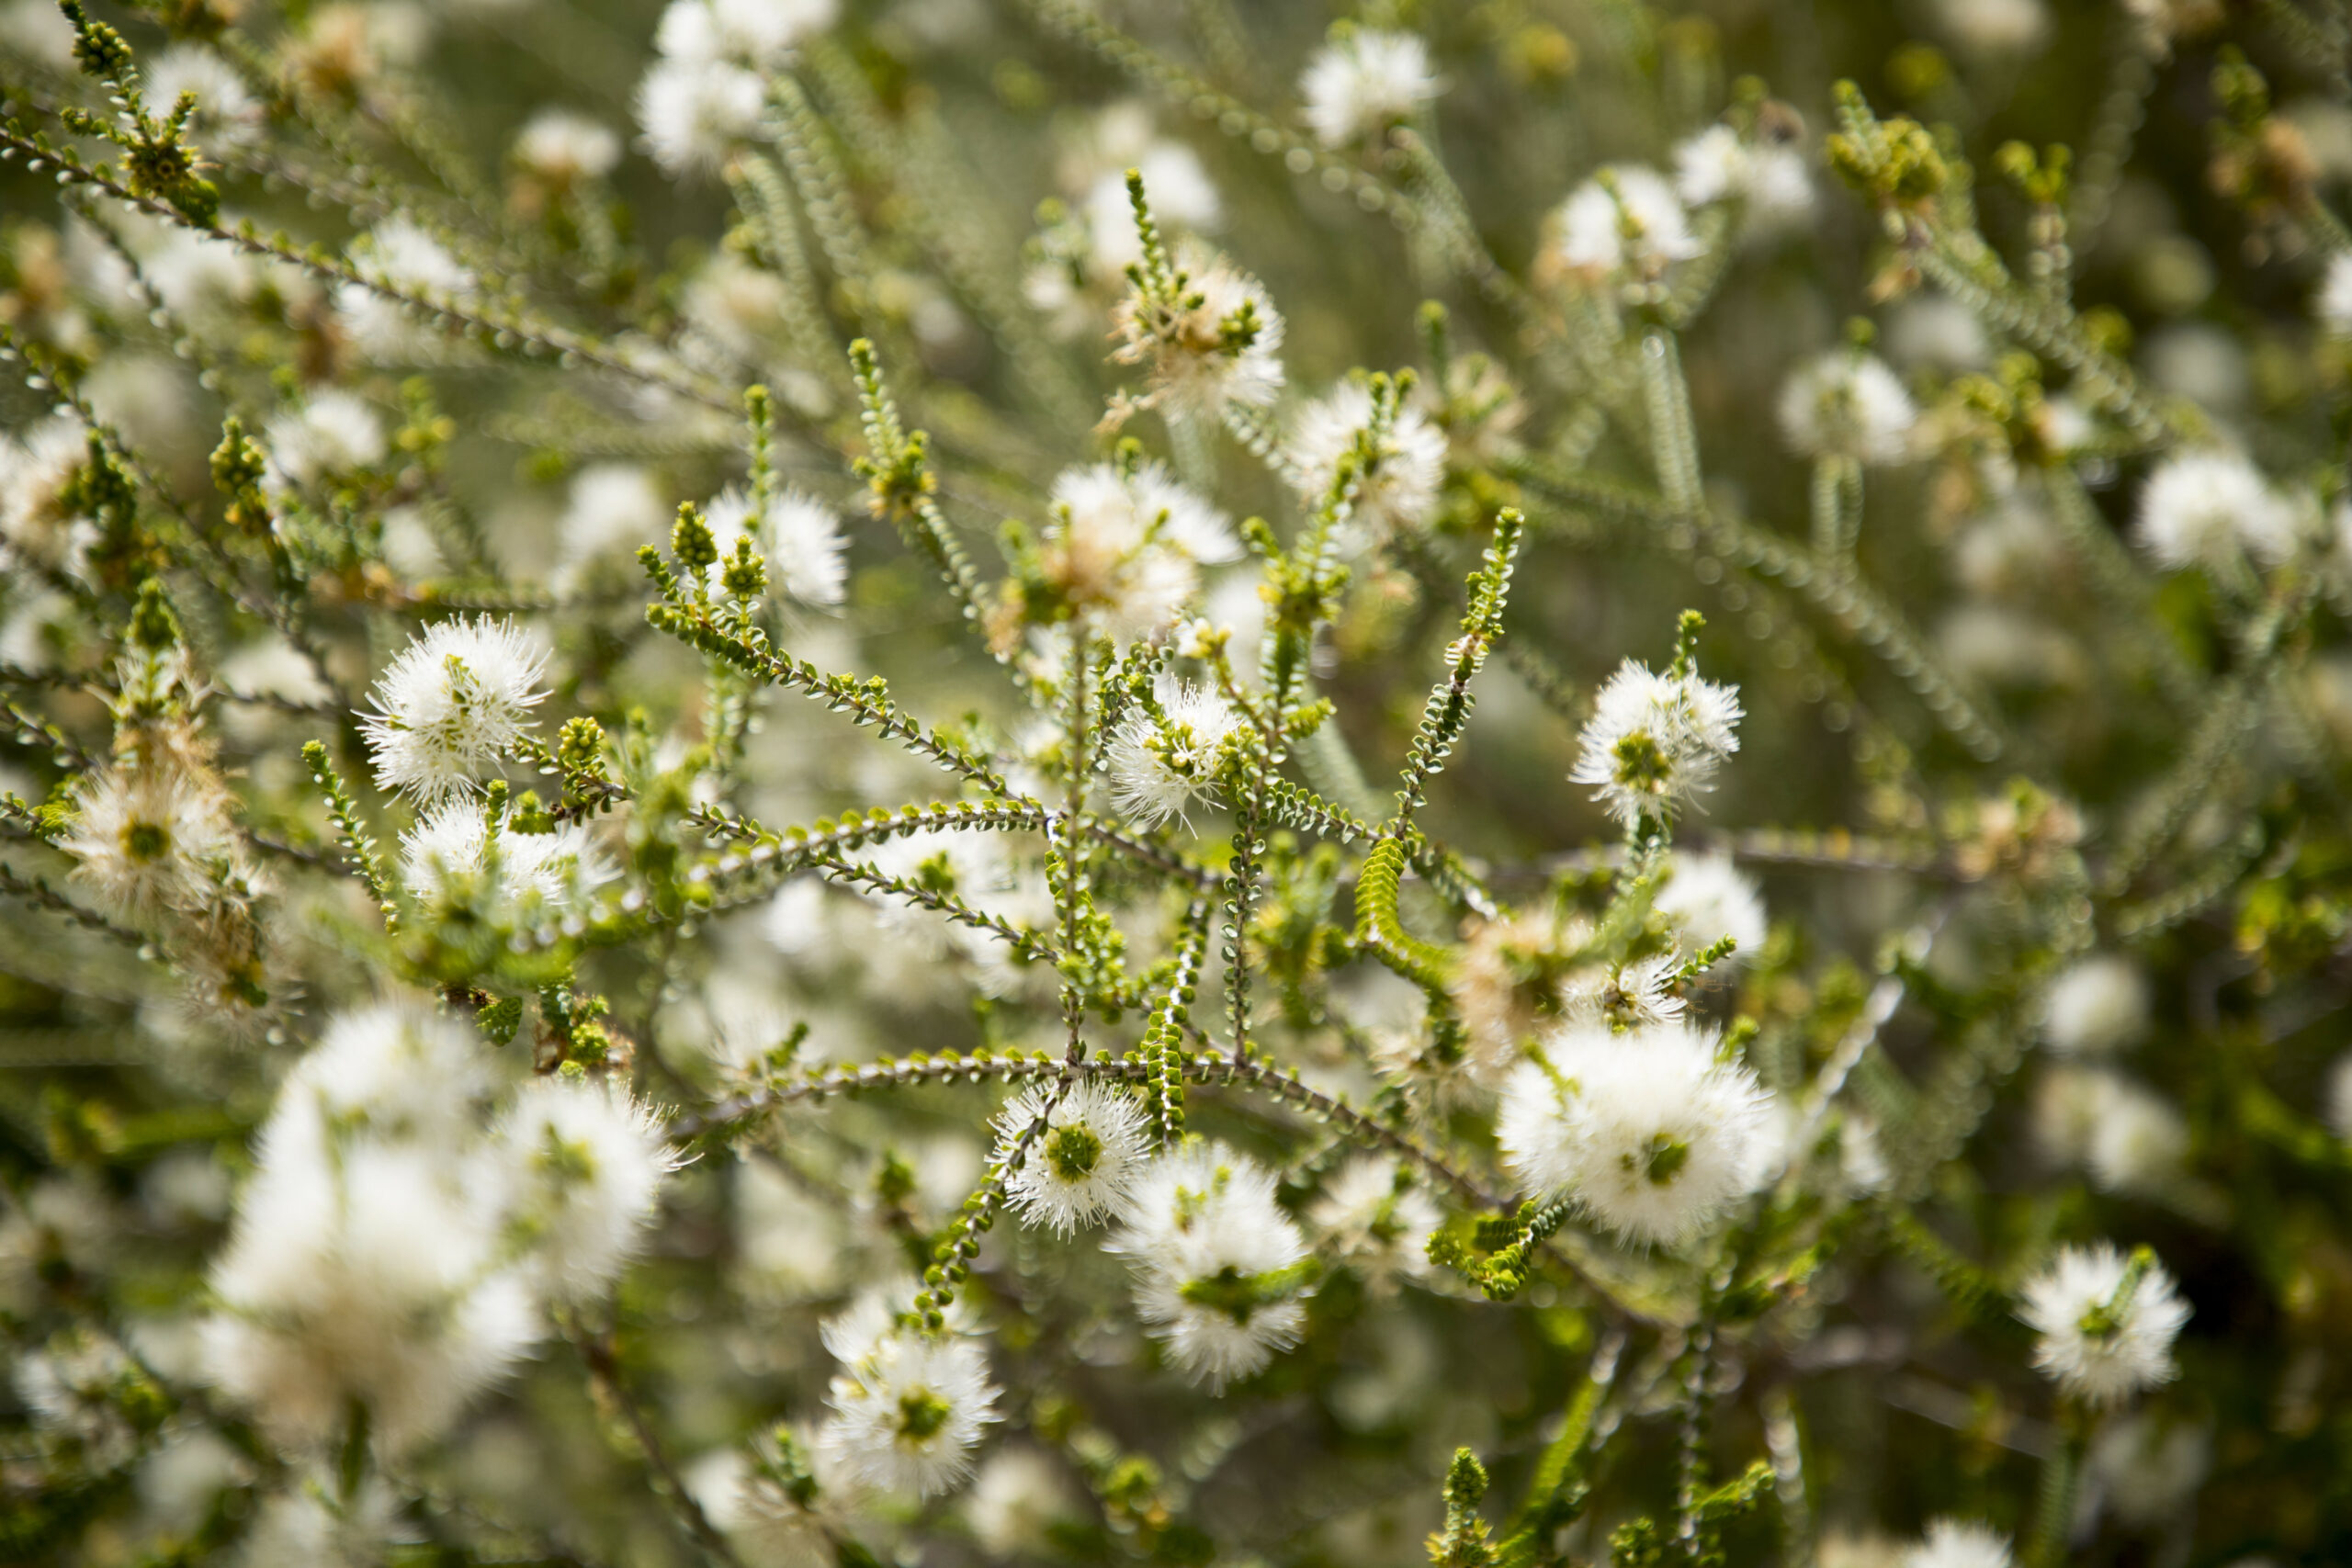 This is a close-up photograph of a Shark Bay Beaufortia. The plant has thin brown stems that are covered with very small round leaves. The flowers of the plant are white and fluffy.